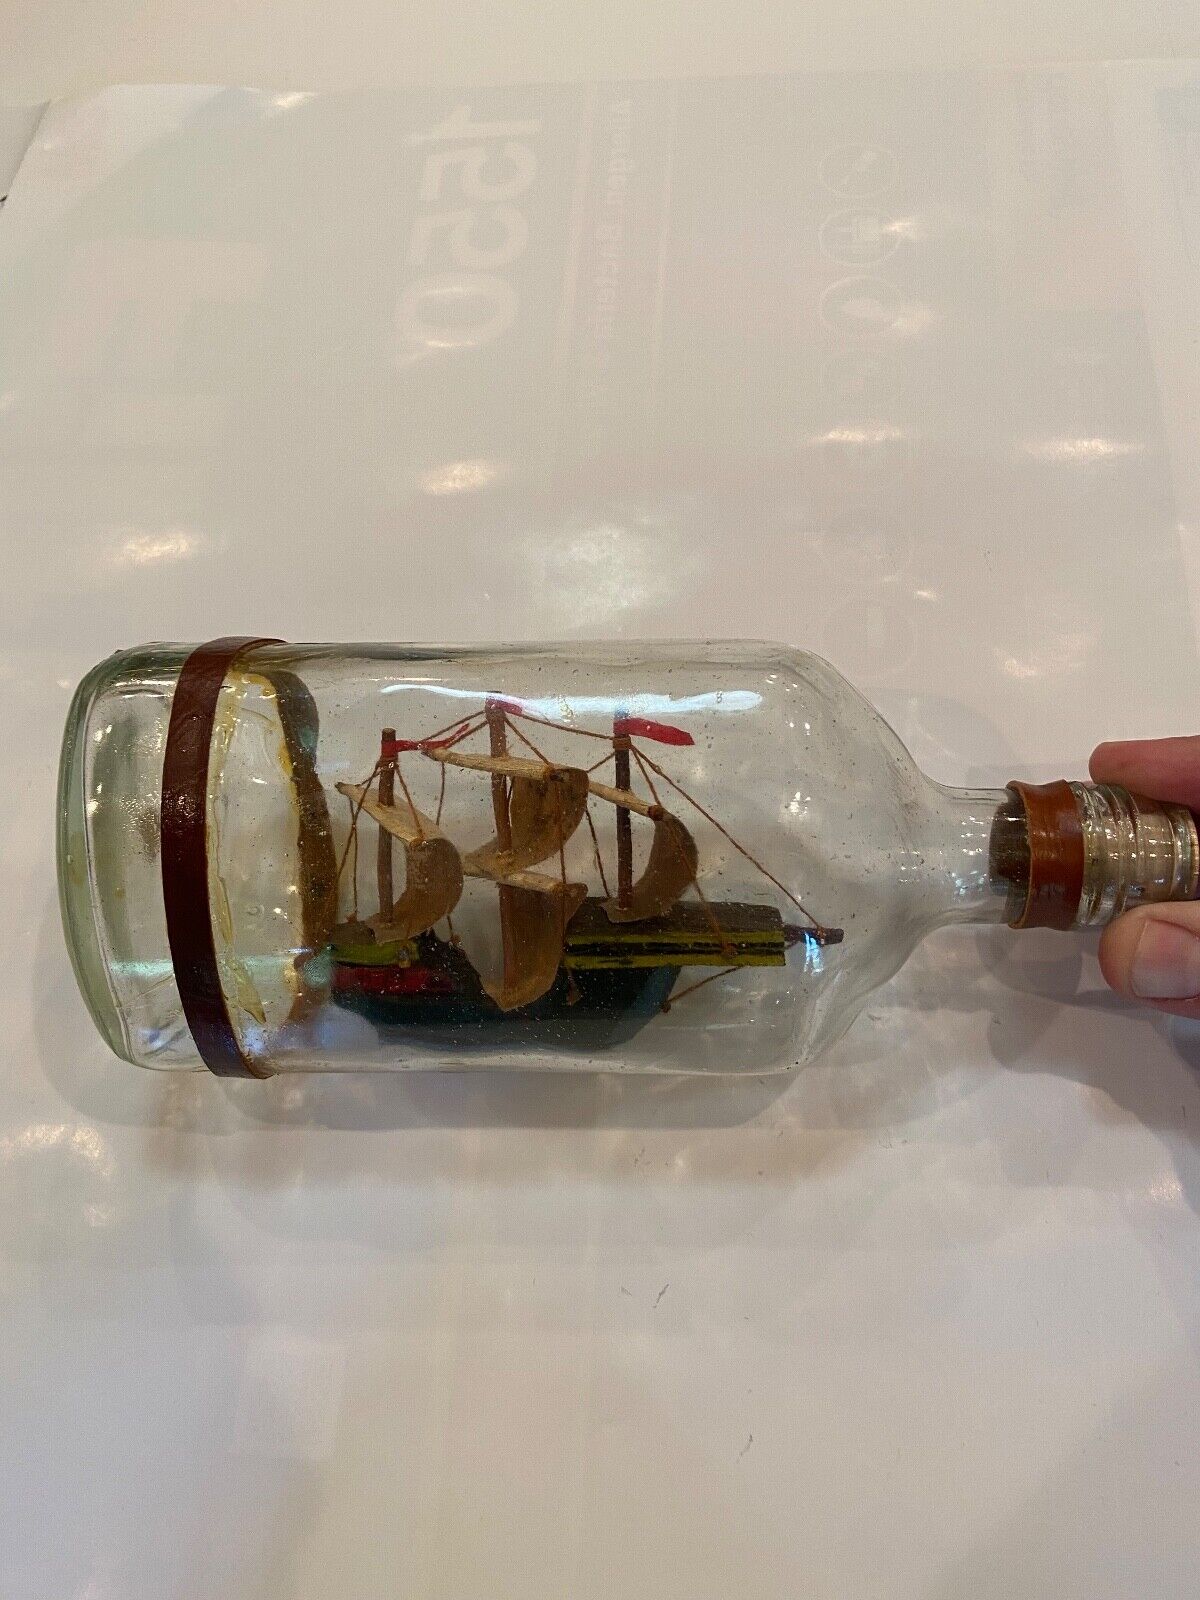 Spanish Galleon Ship in a Bottle